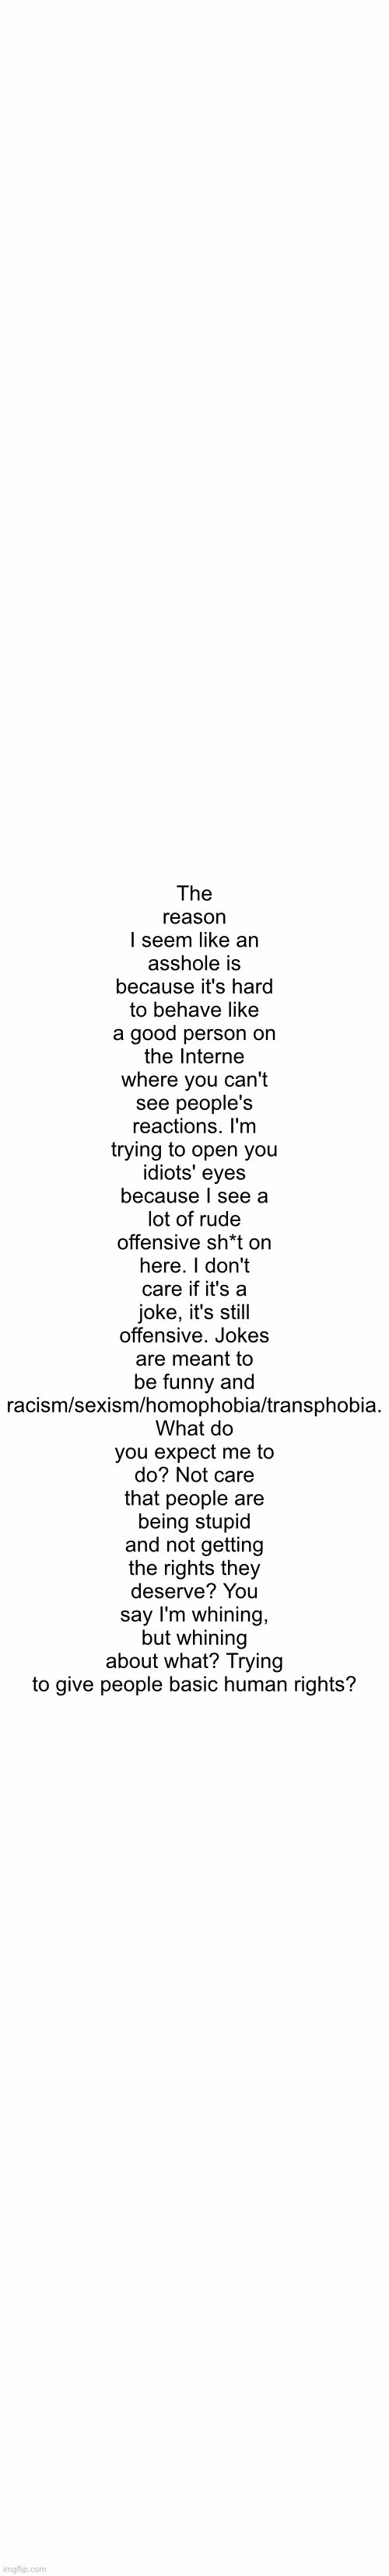 White Text Box | The reason I seem like an asshole is because it's hard to behave like a good person on the Interne where you can't see people's reactions. I'm trying to open you idiots' eyes because I see a lot of rude offensive sh*t on here. I don't care if it's a joke, it's still offensive. Jokes are meant to be funny and racism/sexism/homophobia/transphobia. What do you expect me to do? Not care that people are being stupid and not getting the rights they deserve? You say I'm whining, but whining about what? Trying to give people basic human rights? | image tagged in white text box | made w/ Imgflip meme maker